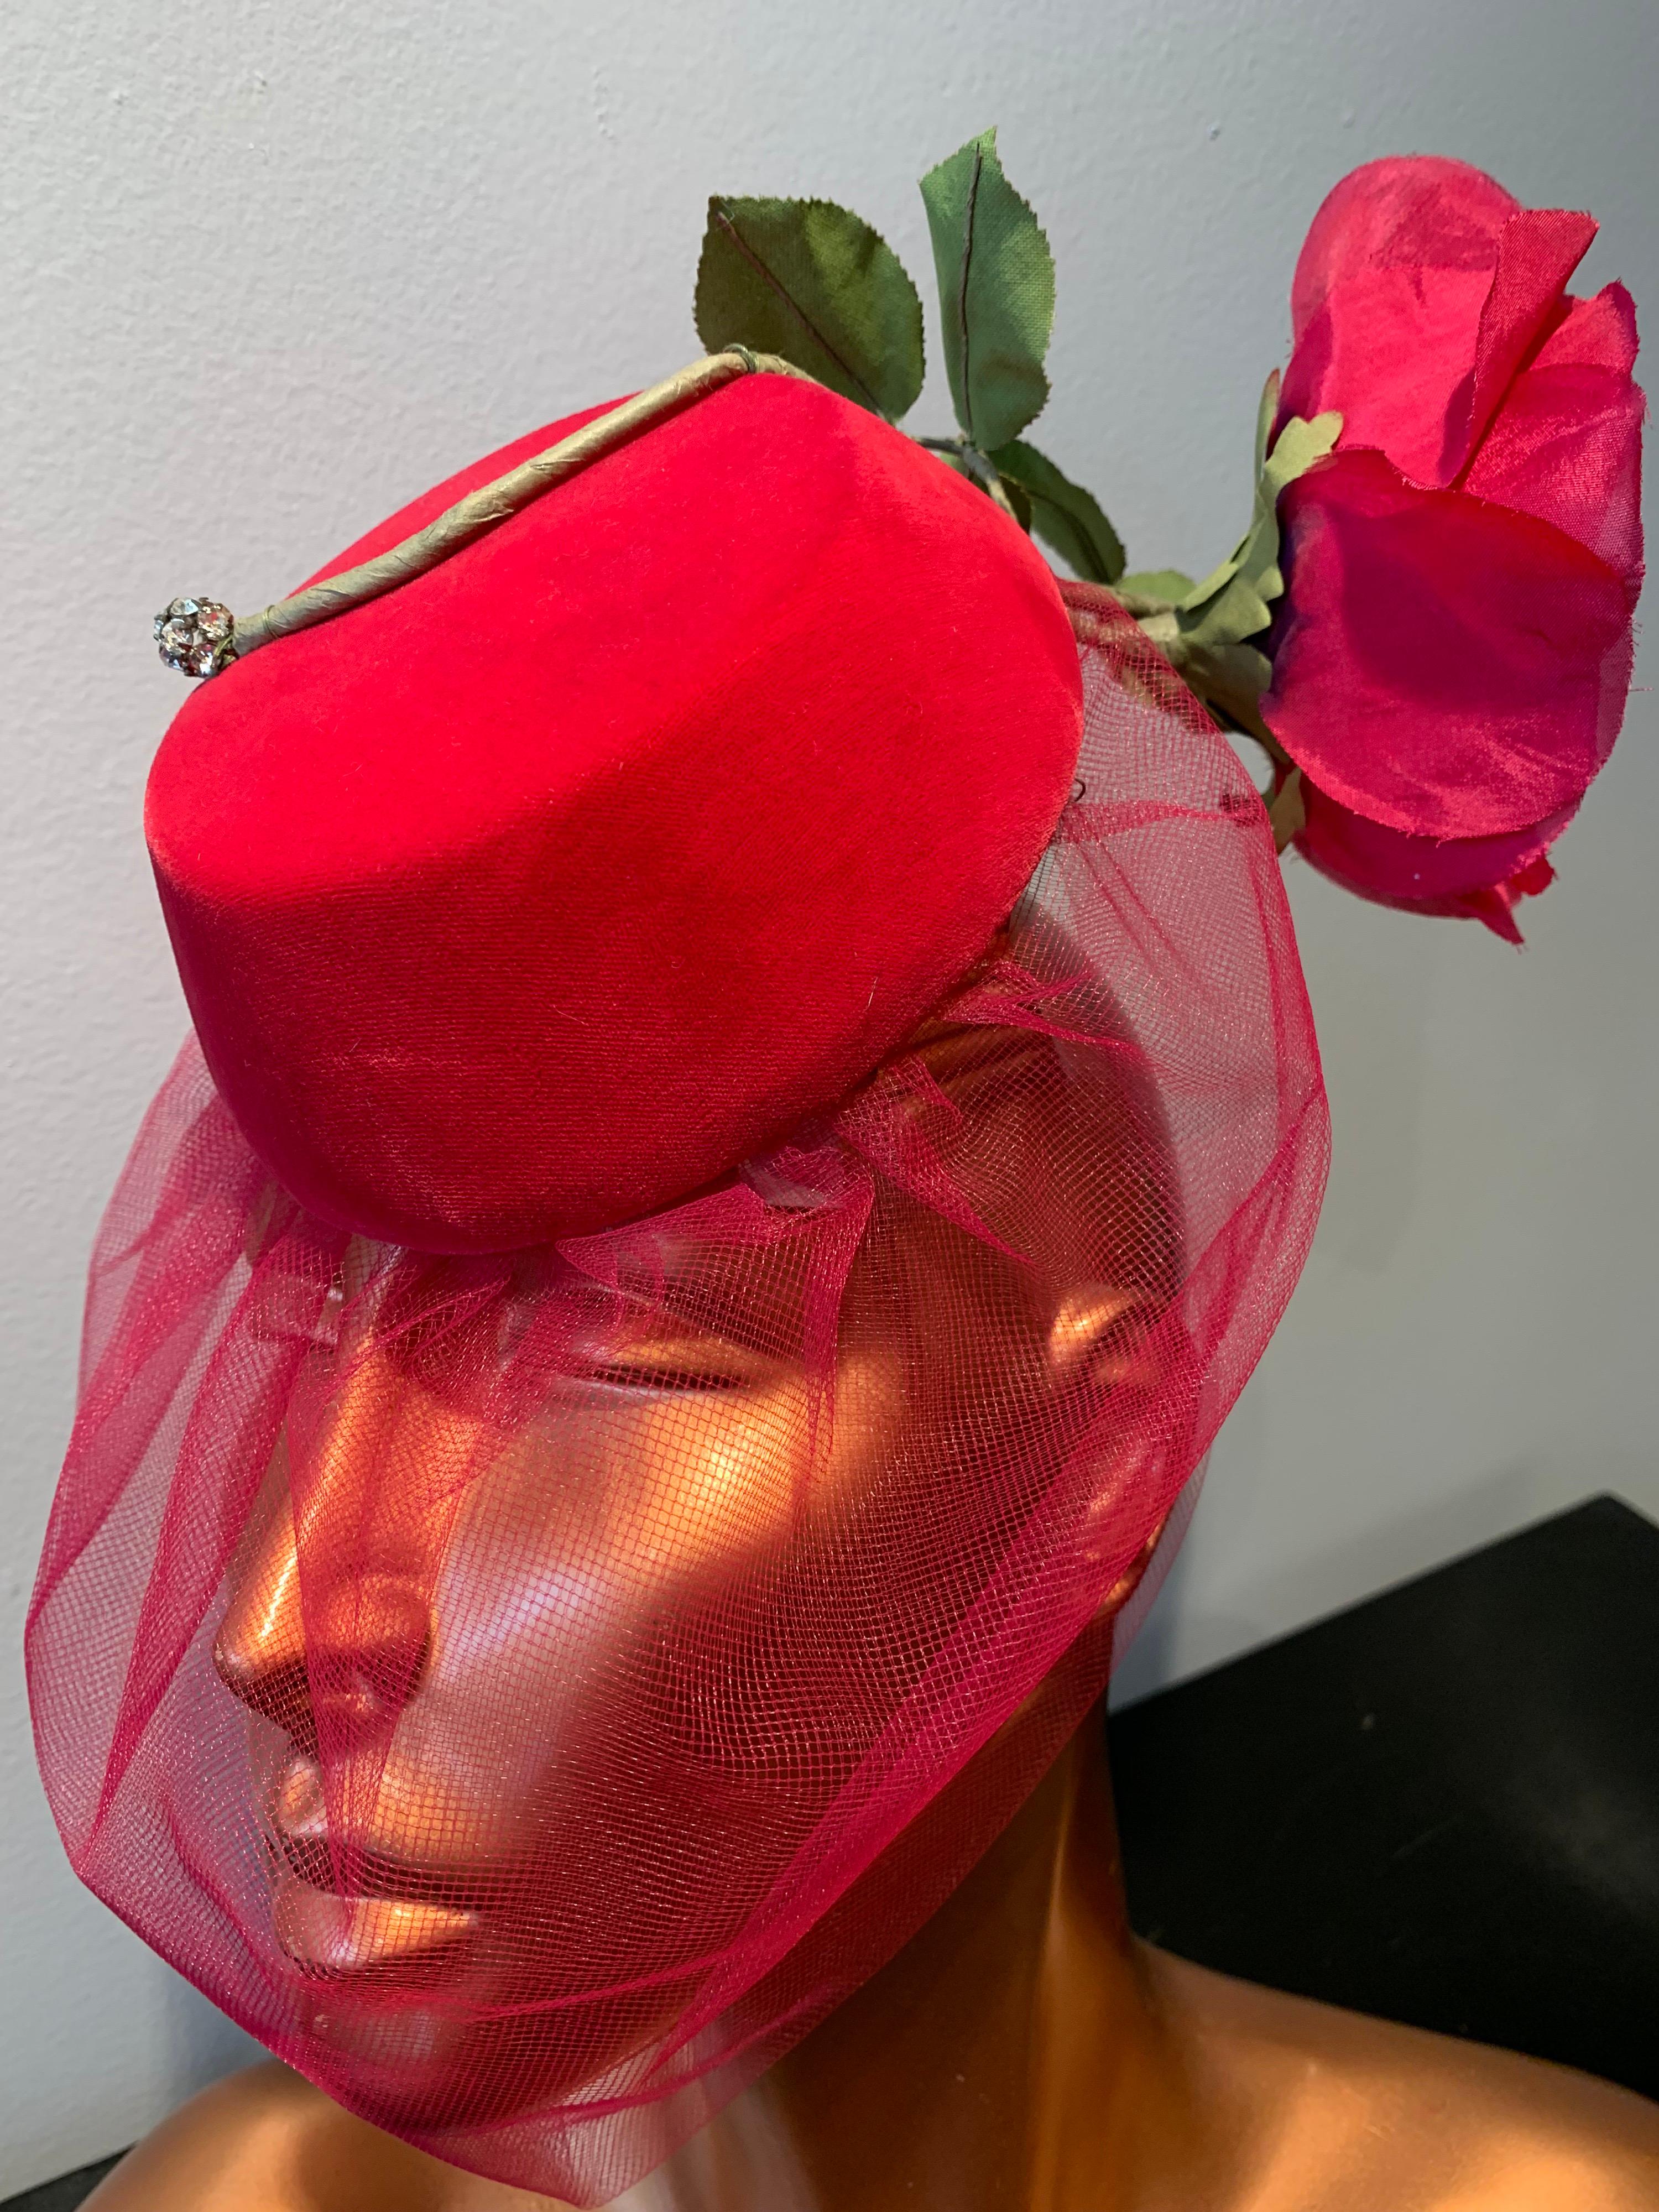 1960s Sally Victor Shocking Pink Toy Pillbox Hat W/ Dramatic Silk Rose & Veil. Hat is a silk velvet demi-chapeau style with interior comb for secure wear. Veiling is semi-opaque in coordinating pink. Flower stem is embellished a tip with a